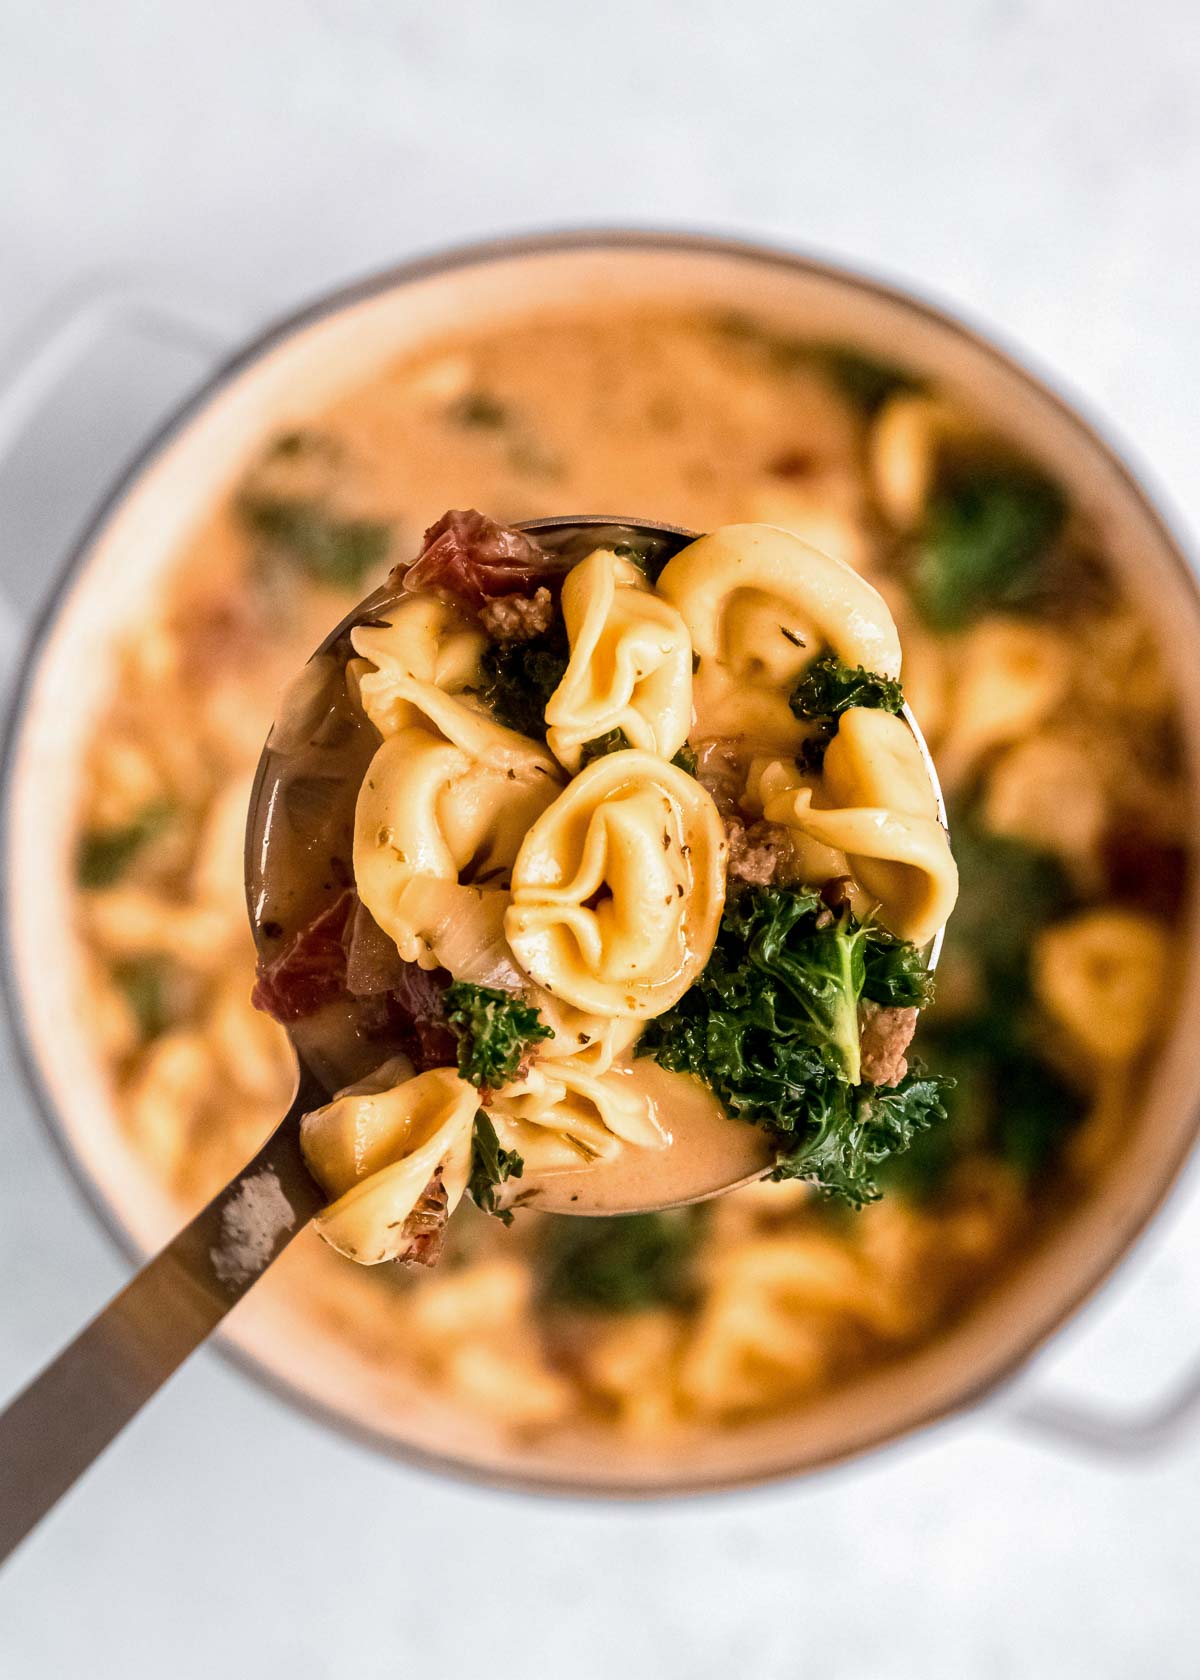 a spoon full of creamy soup, tender sausage, and delicious tortellini